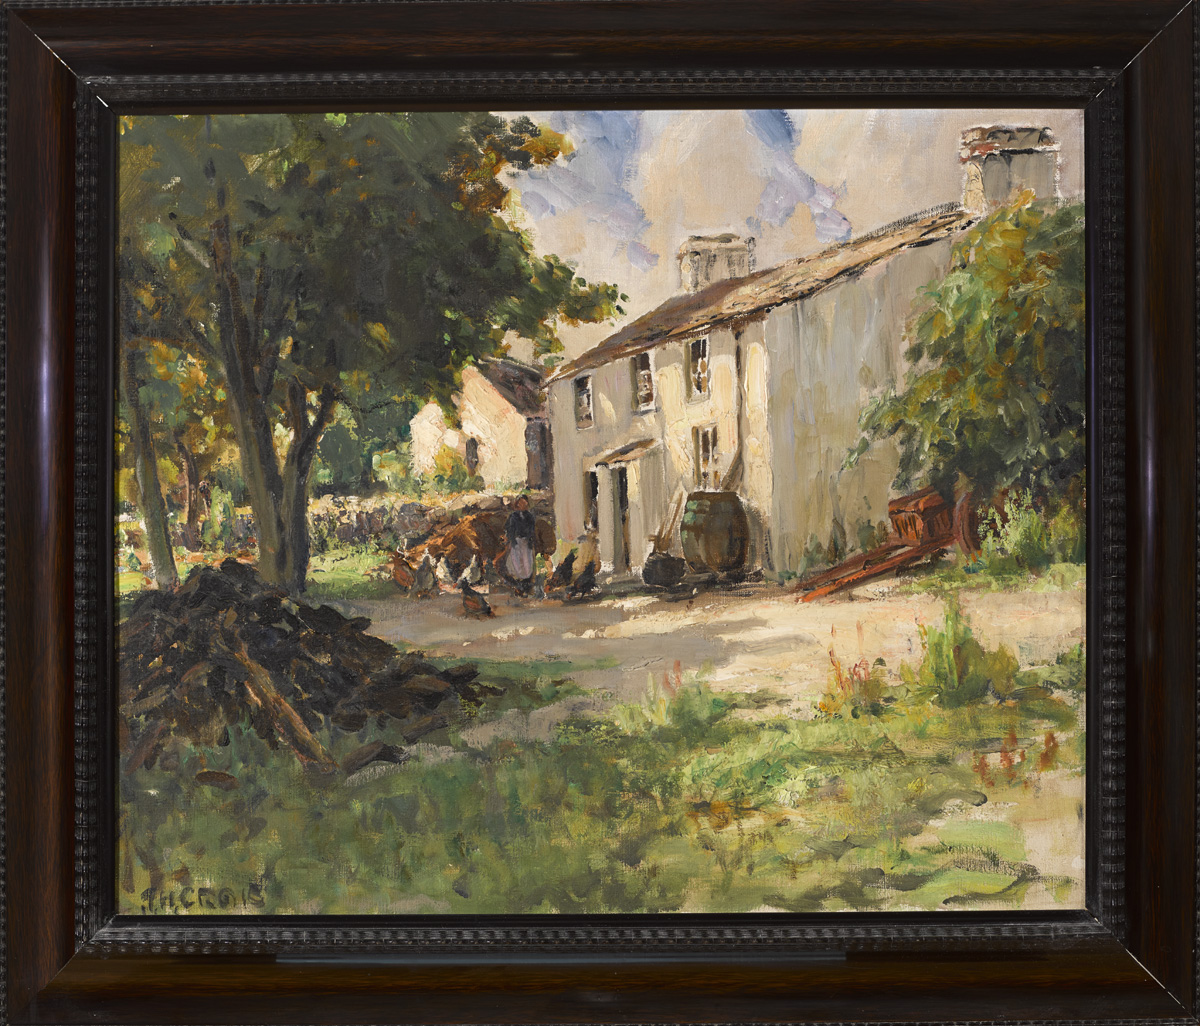 James Humbert Craig RHA RUA (1877-1944) FARMHOUSE, WOMAN AND HENS oil on canvas signed lower left; - Image 2 of 2